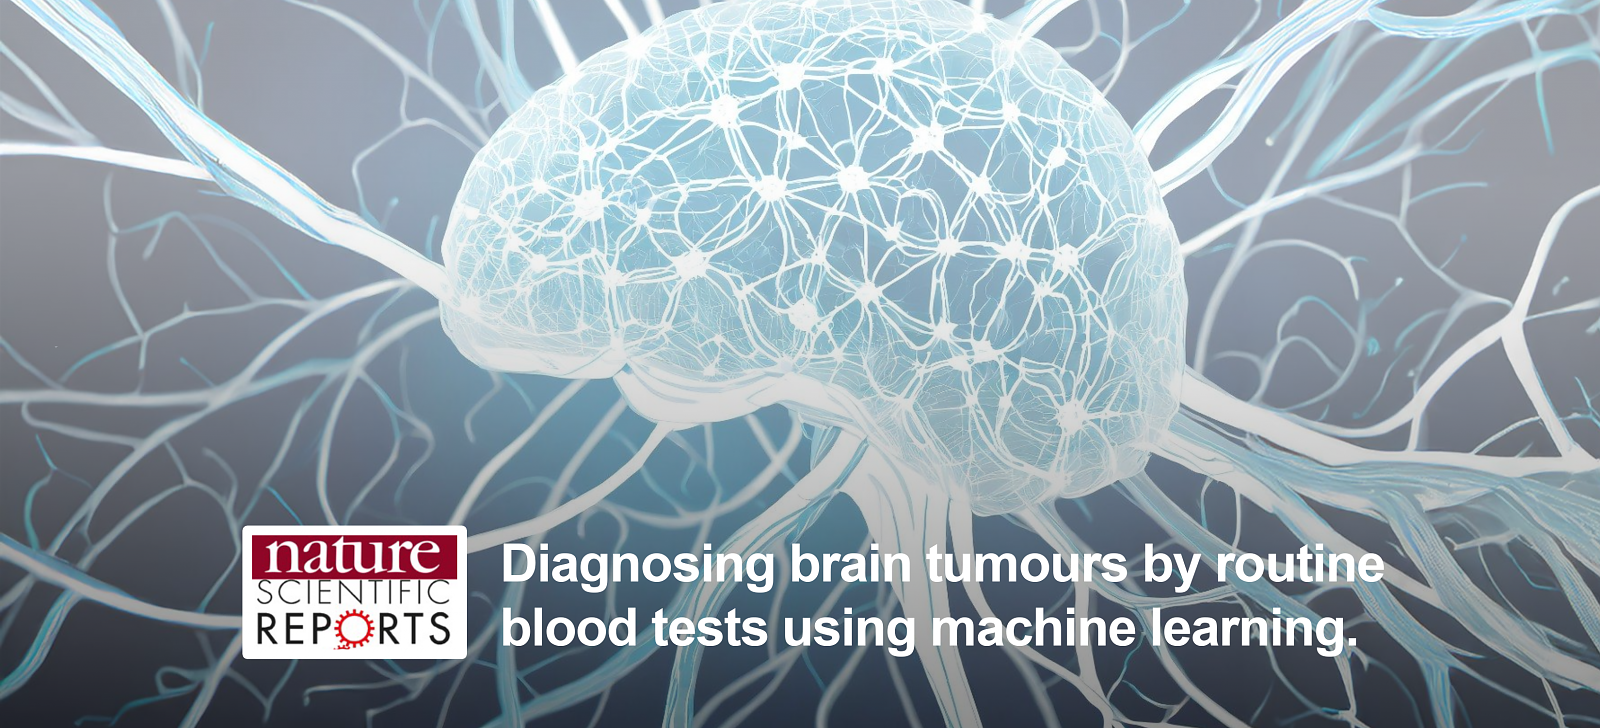 Diagnosing brain tumours by routine blood tests using machine learning